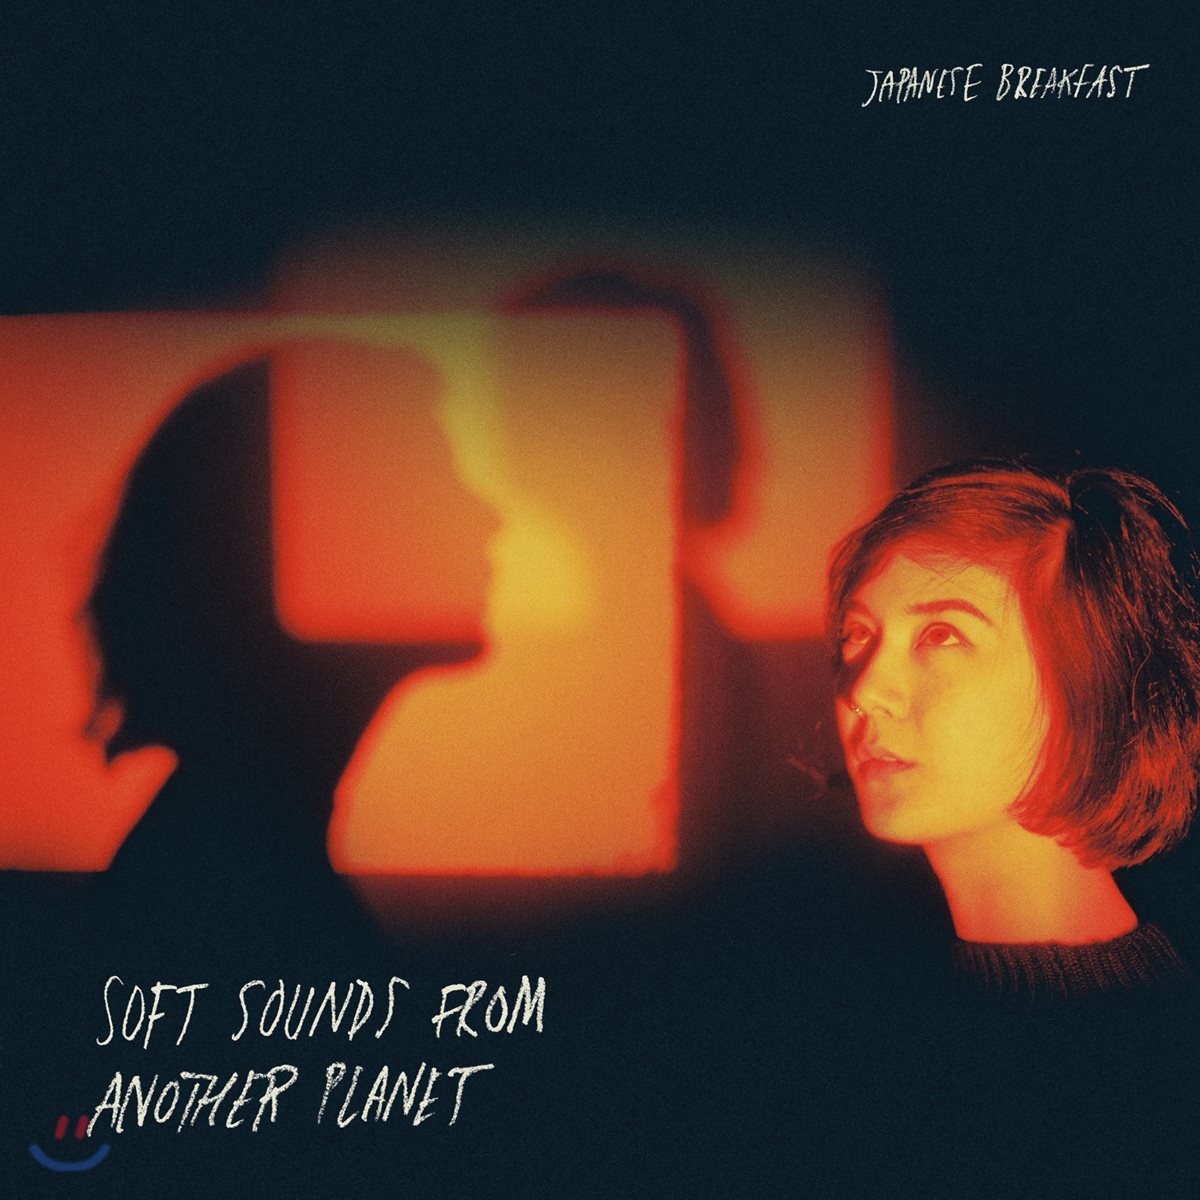 Japanese Breakfast (재패니즈 브렉퍼스트) - Soft Sounds from Another Planet [레드 컬러 LP]